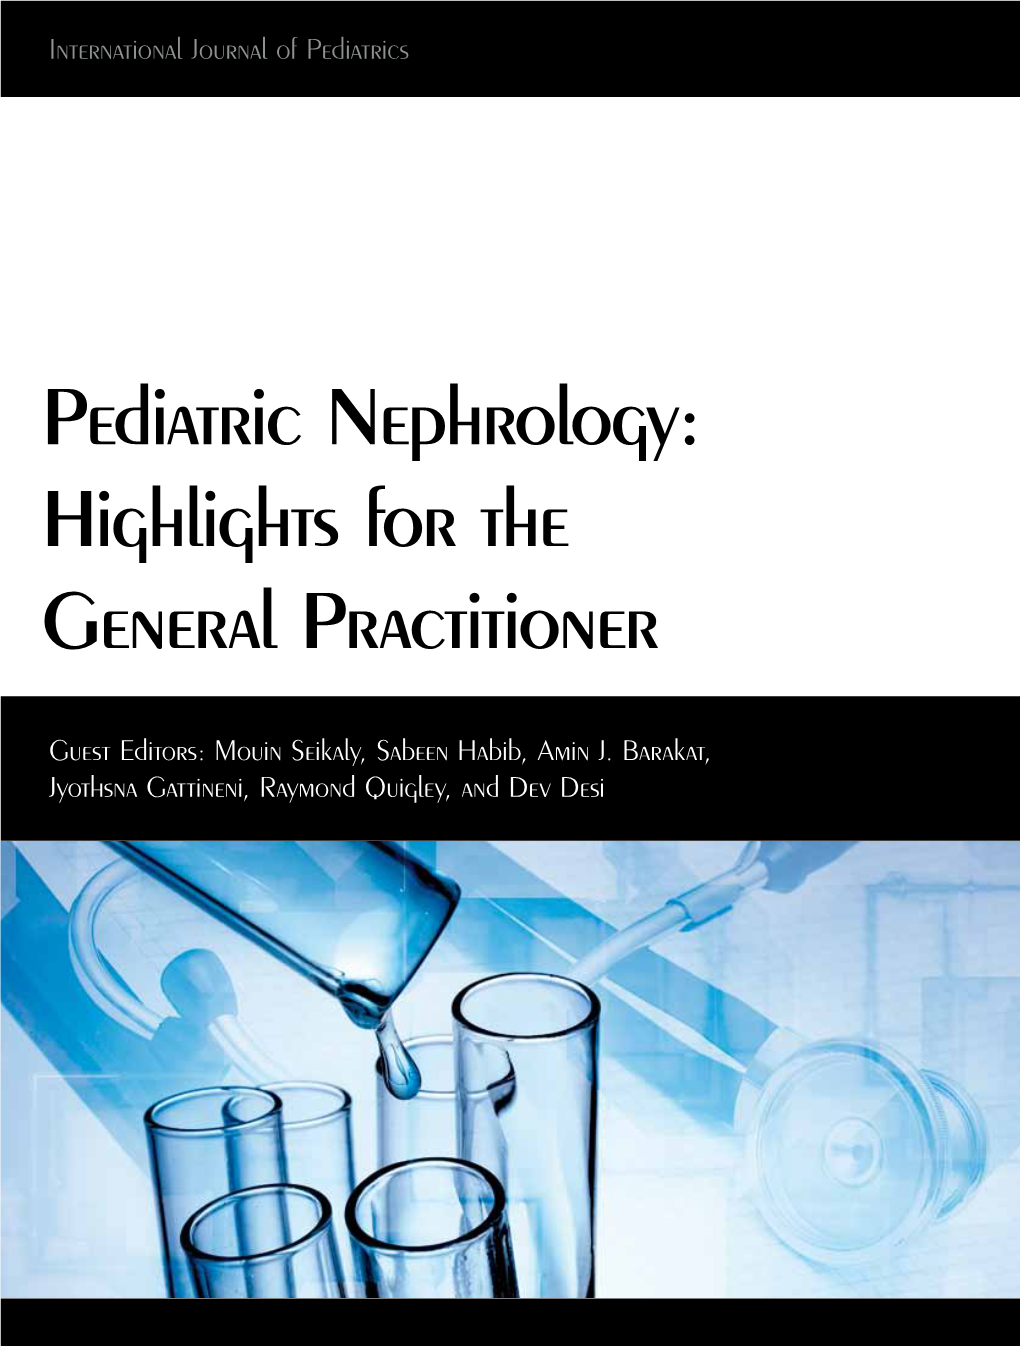 Pediatric Nephrology: Highlights for the General Practitioner